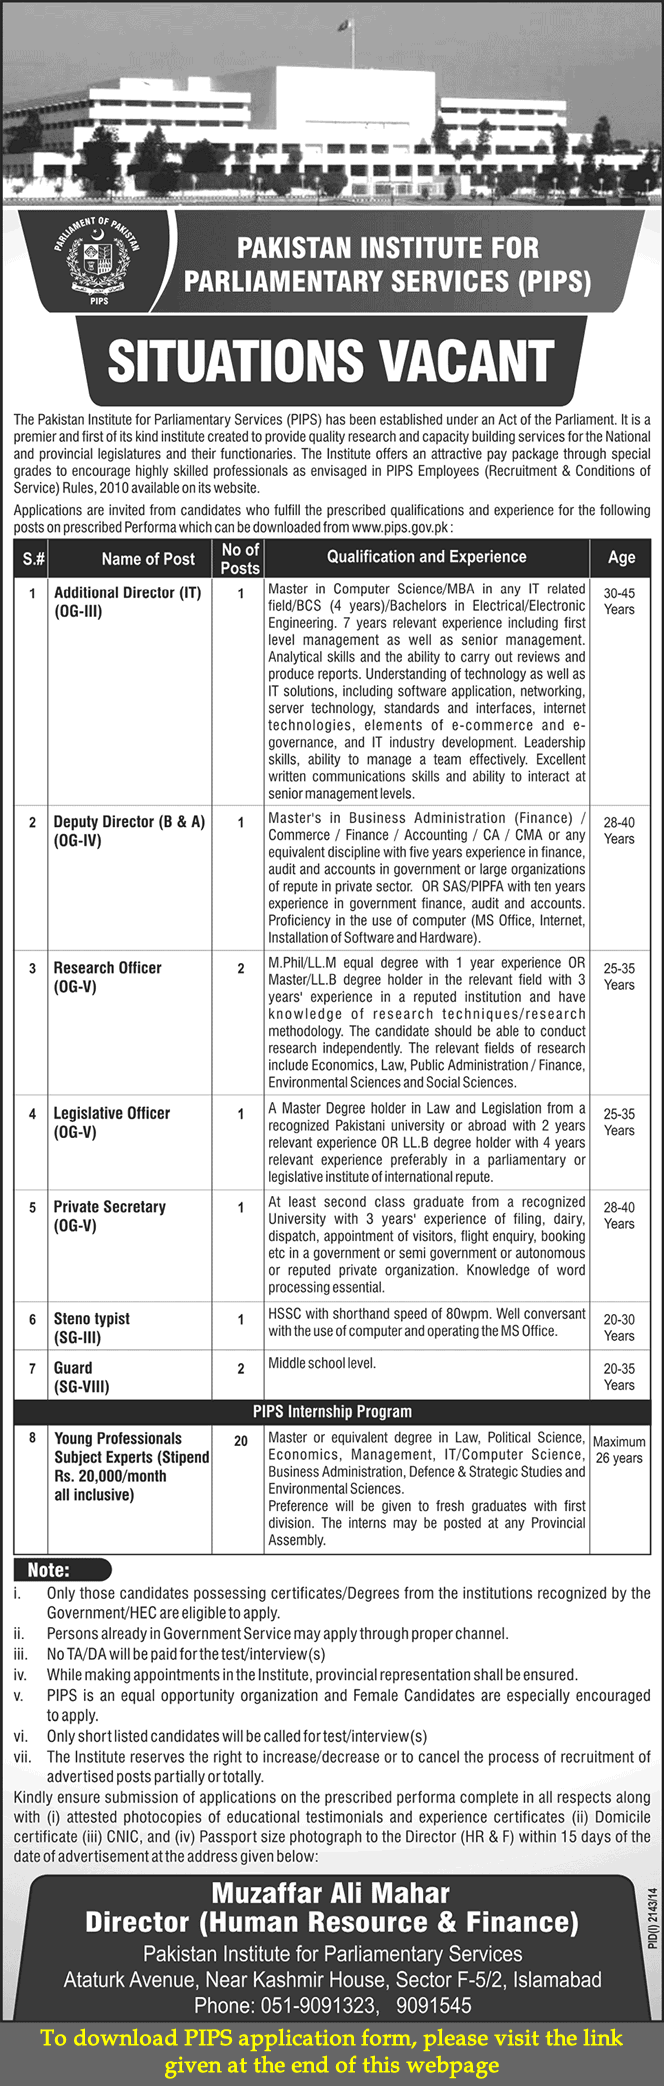 Pakistan Institute for Parliamentary Services Islamabad Jobs 2014 November PIPS Application Form